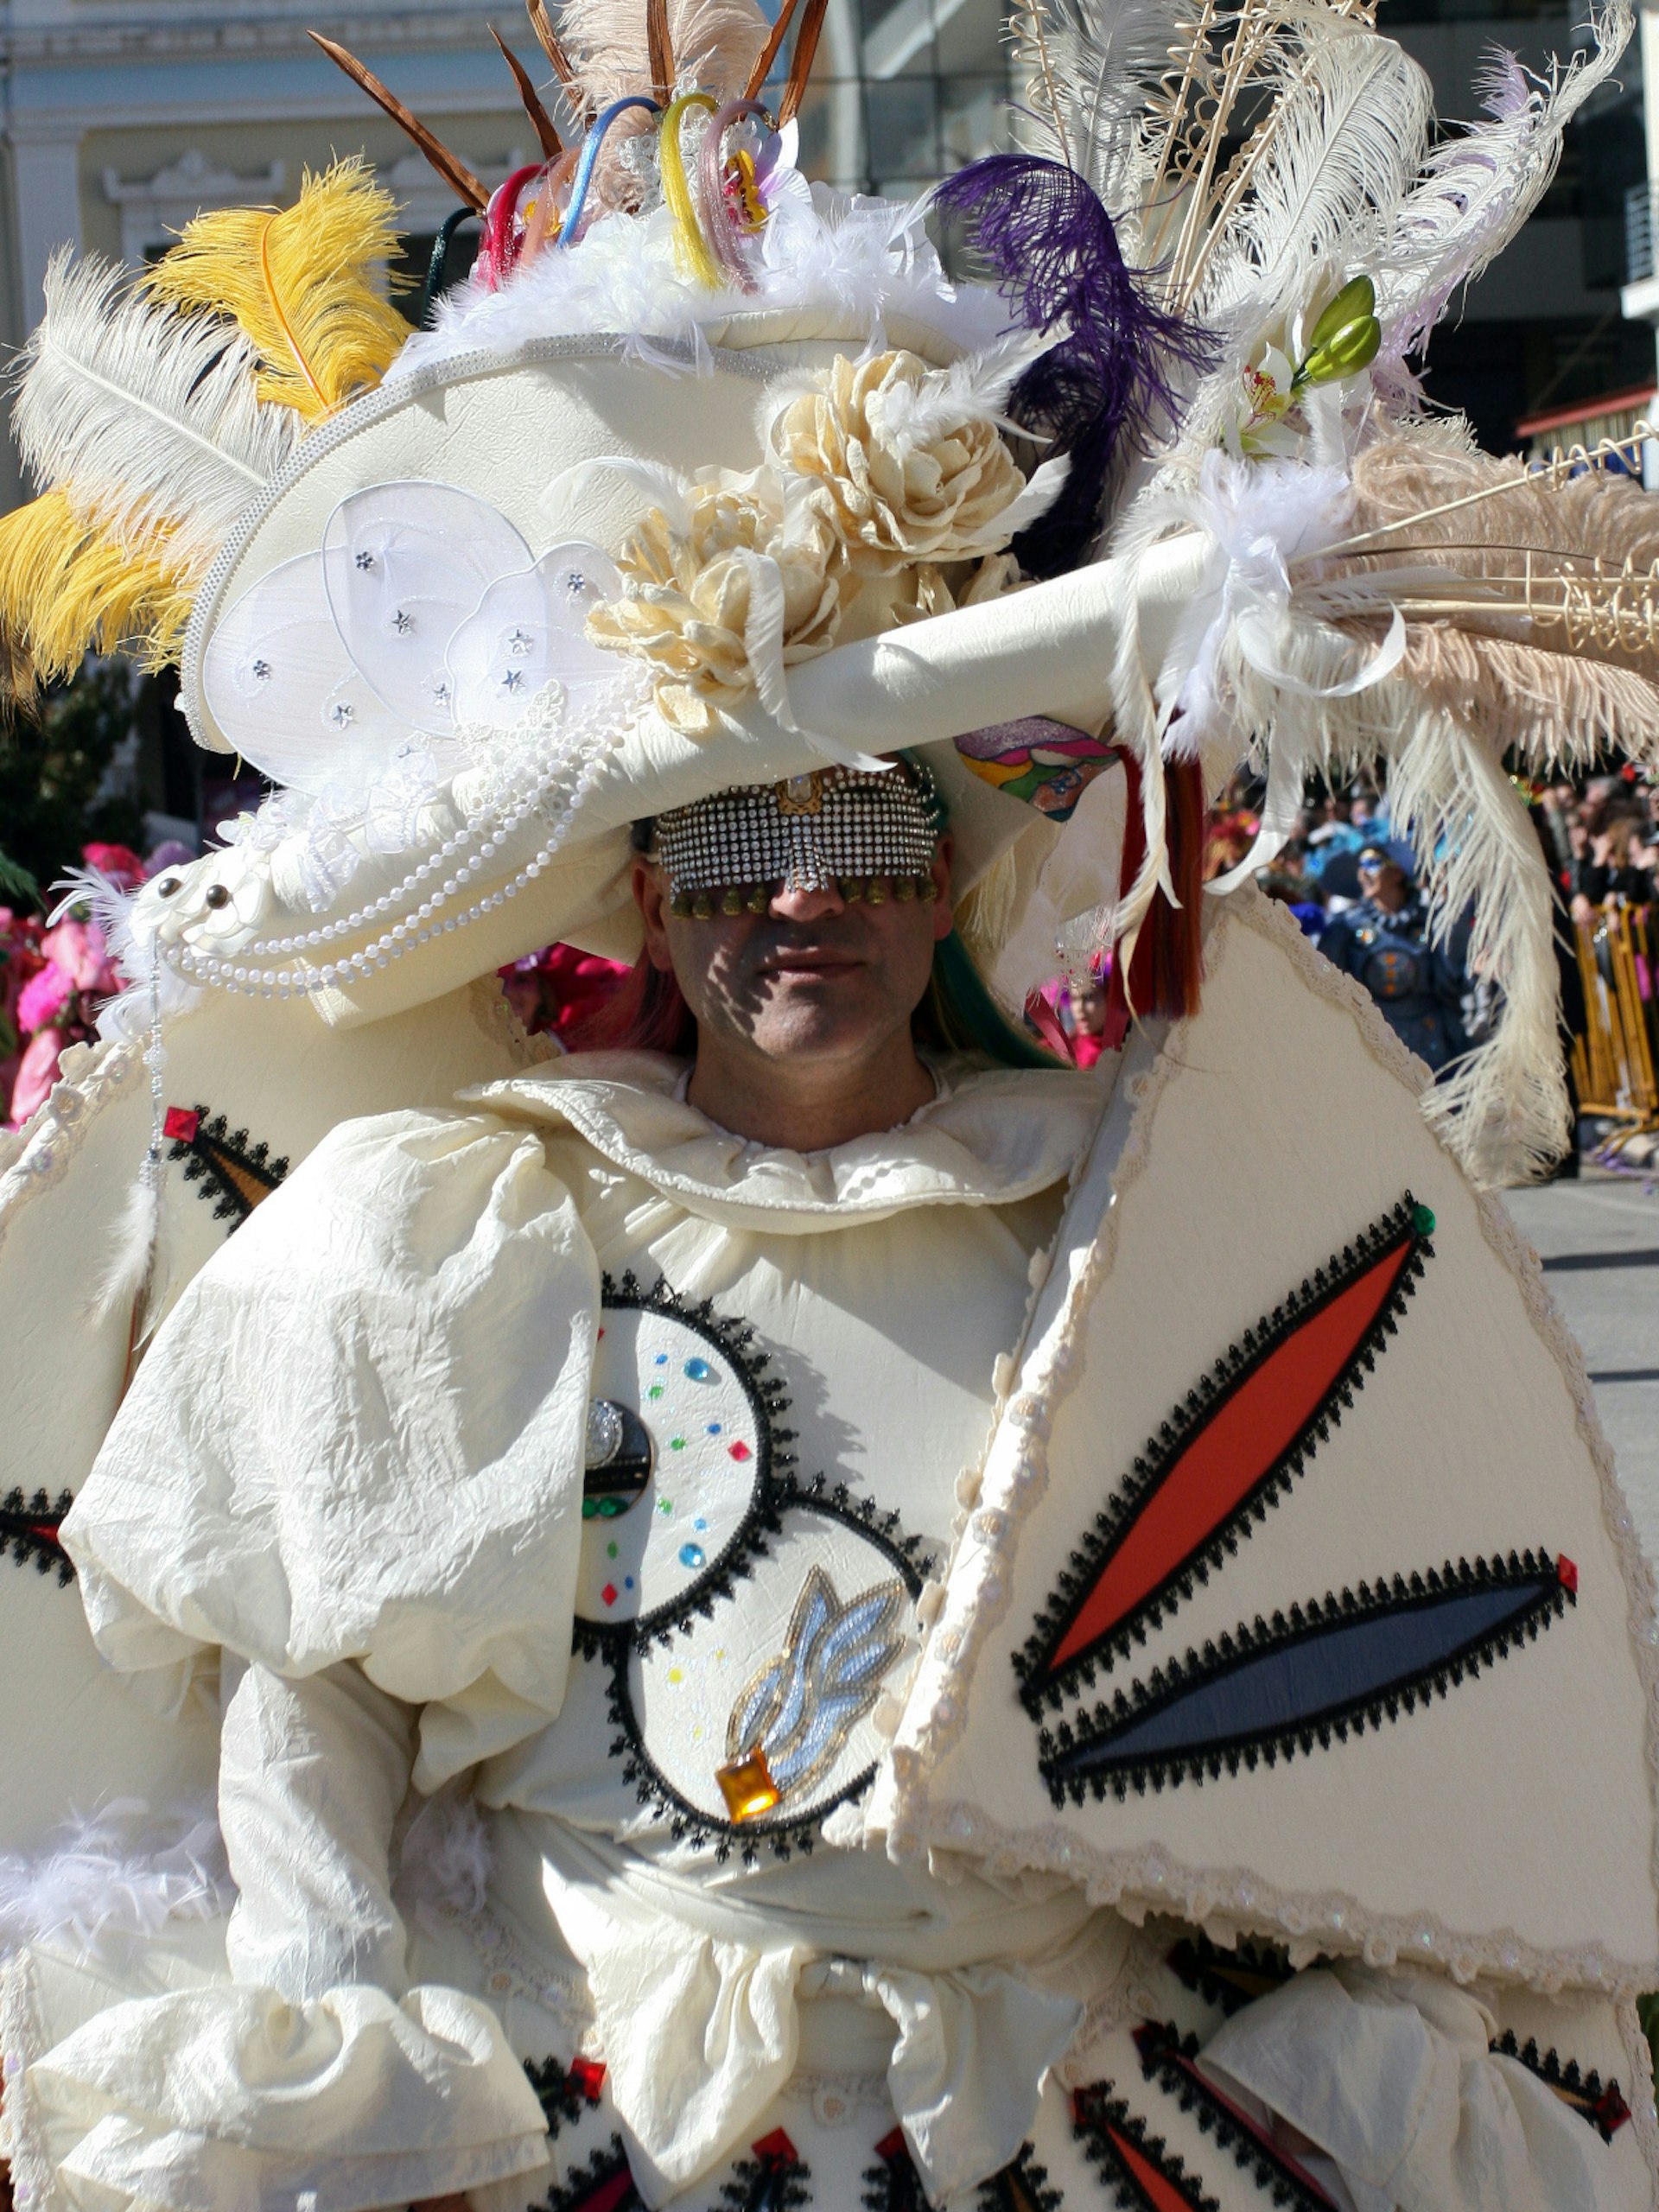 A person wearing a beaded mask is dressed in white with colourful patches, and elaborate head wear